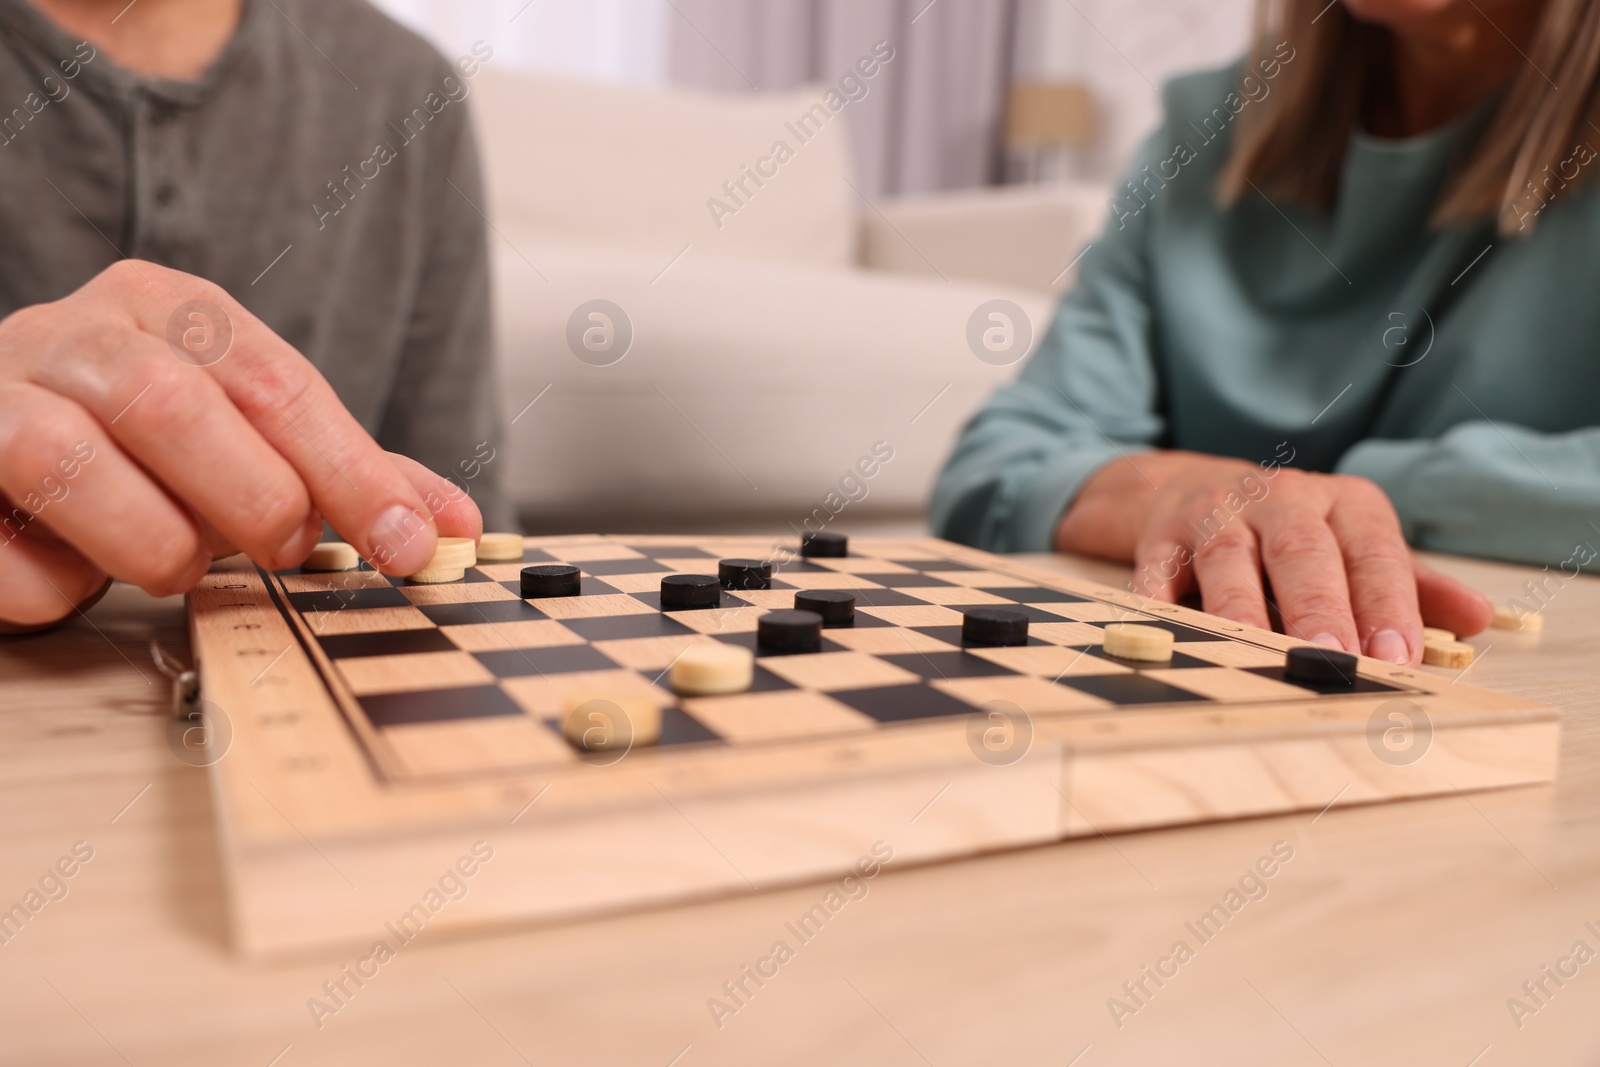 Photo of People playing checkers at wooden table in room, closeup